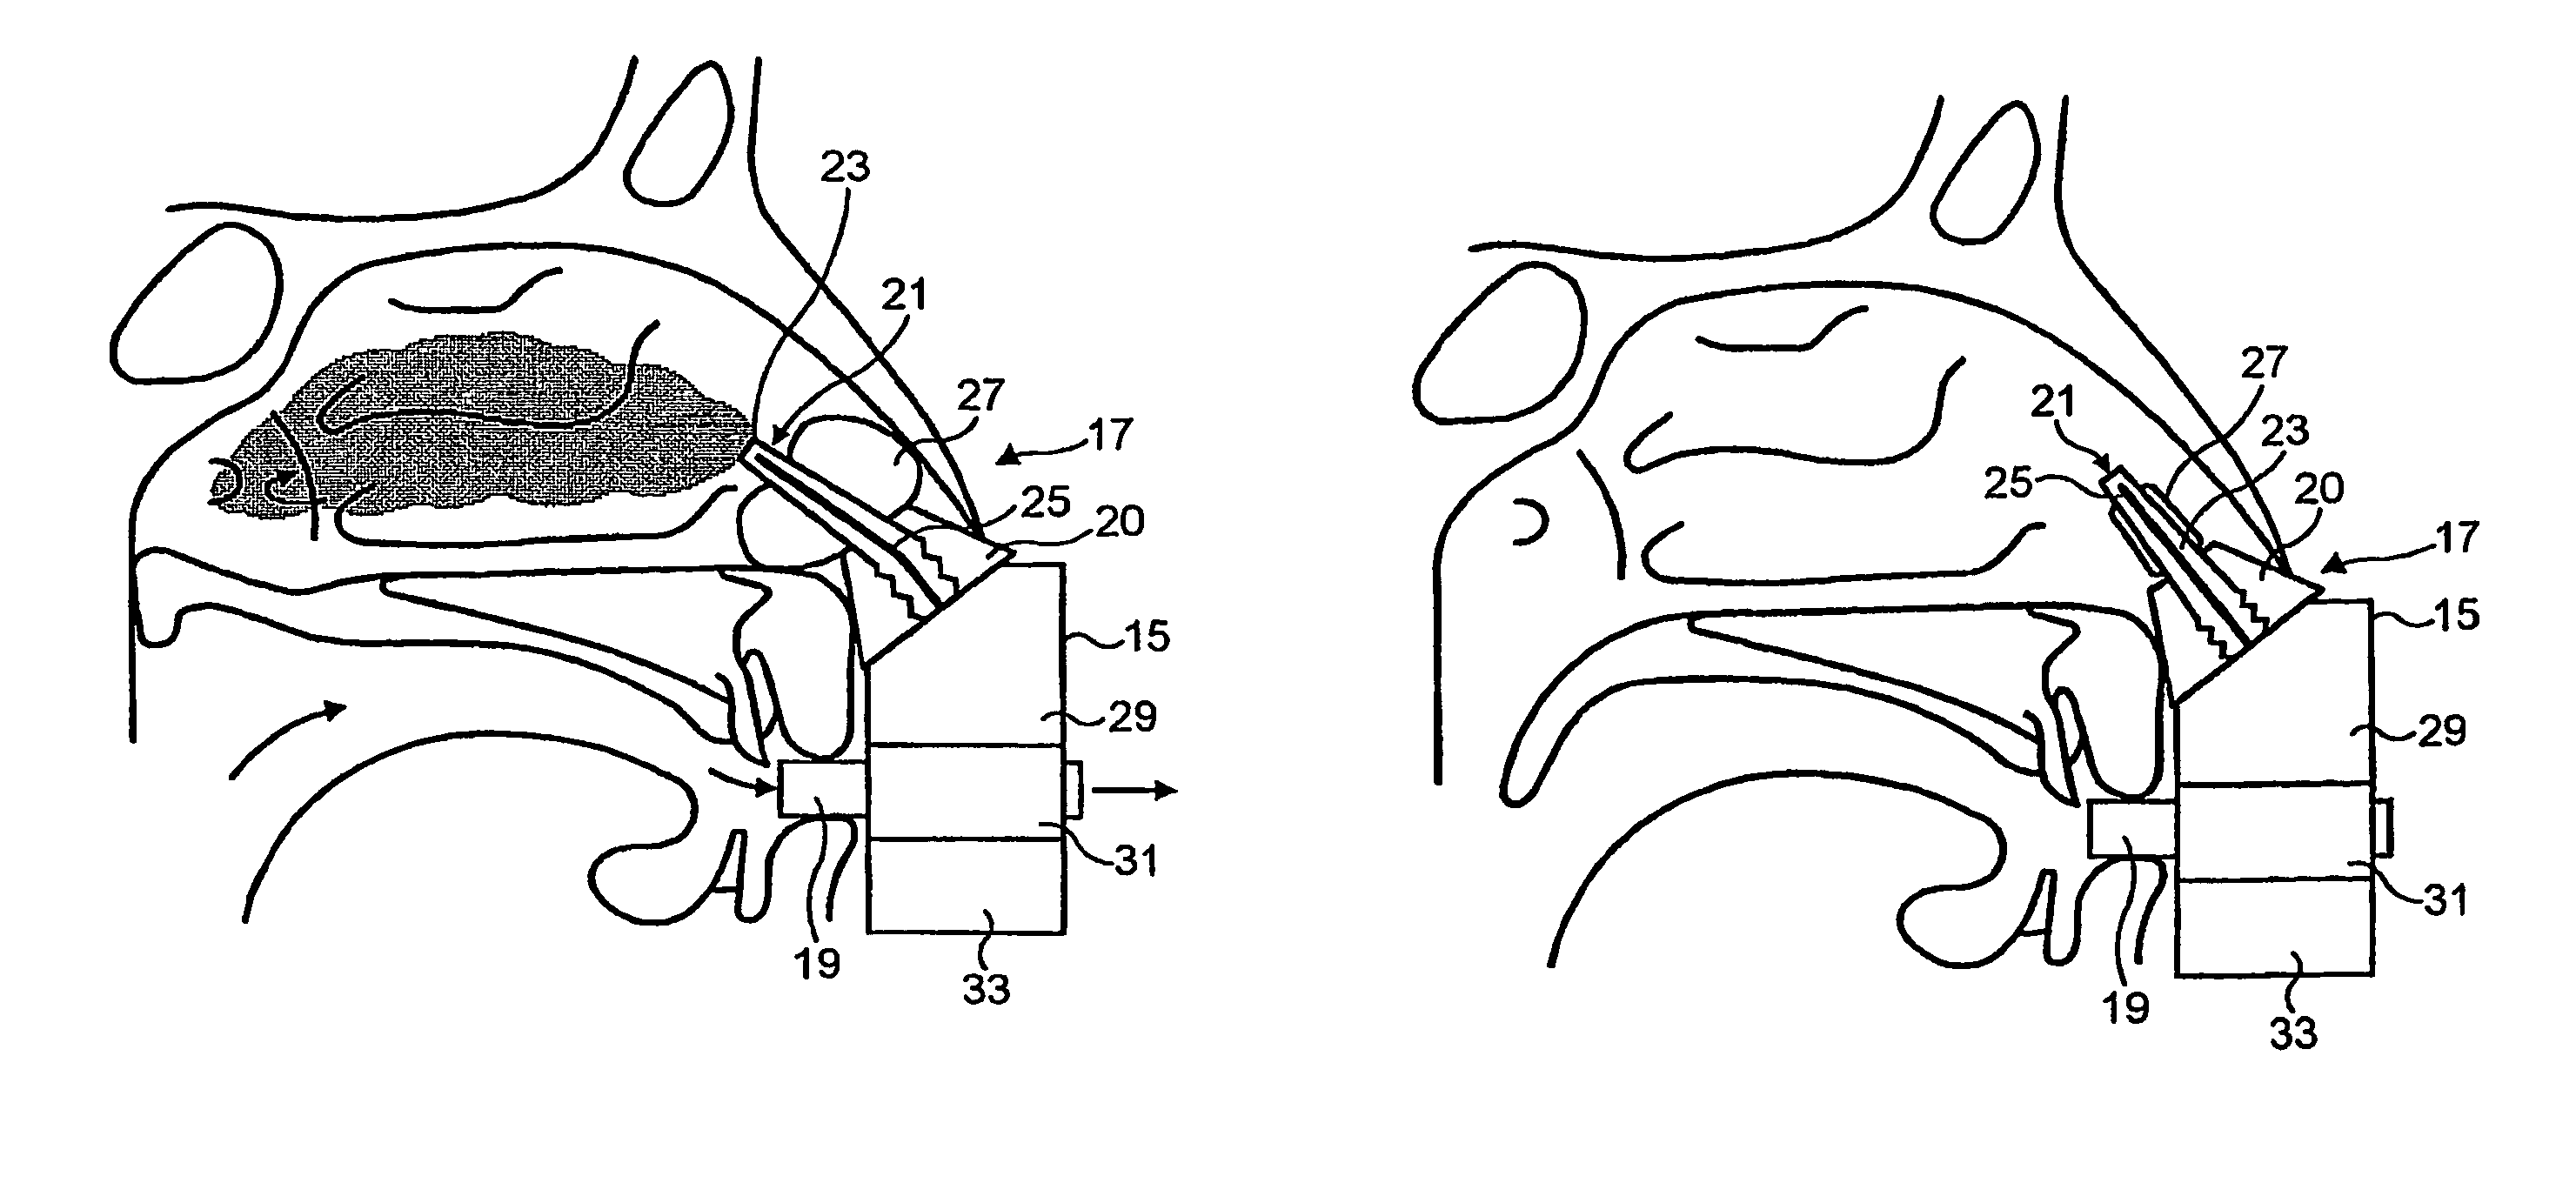 Nasal devices